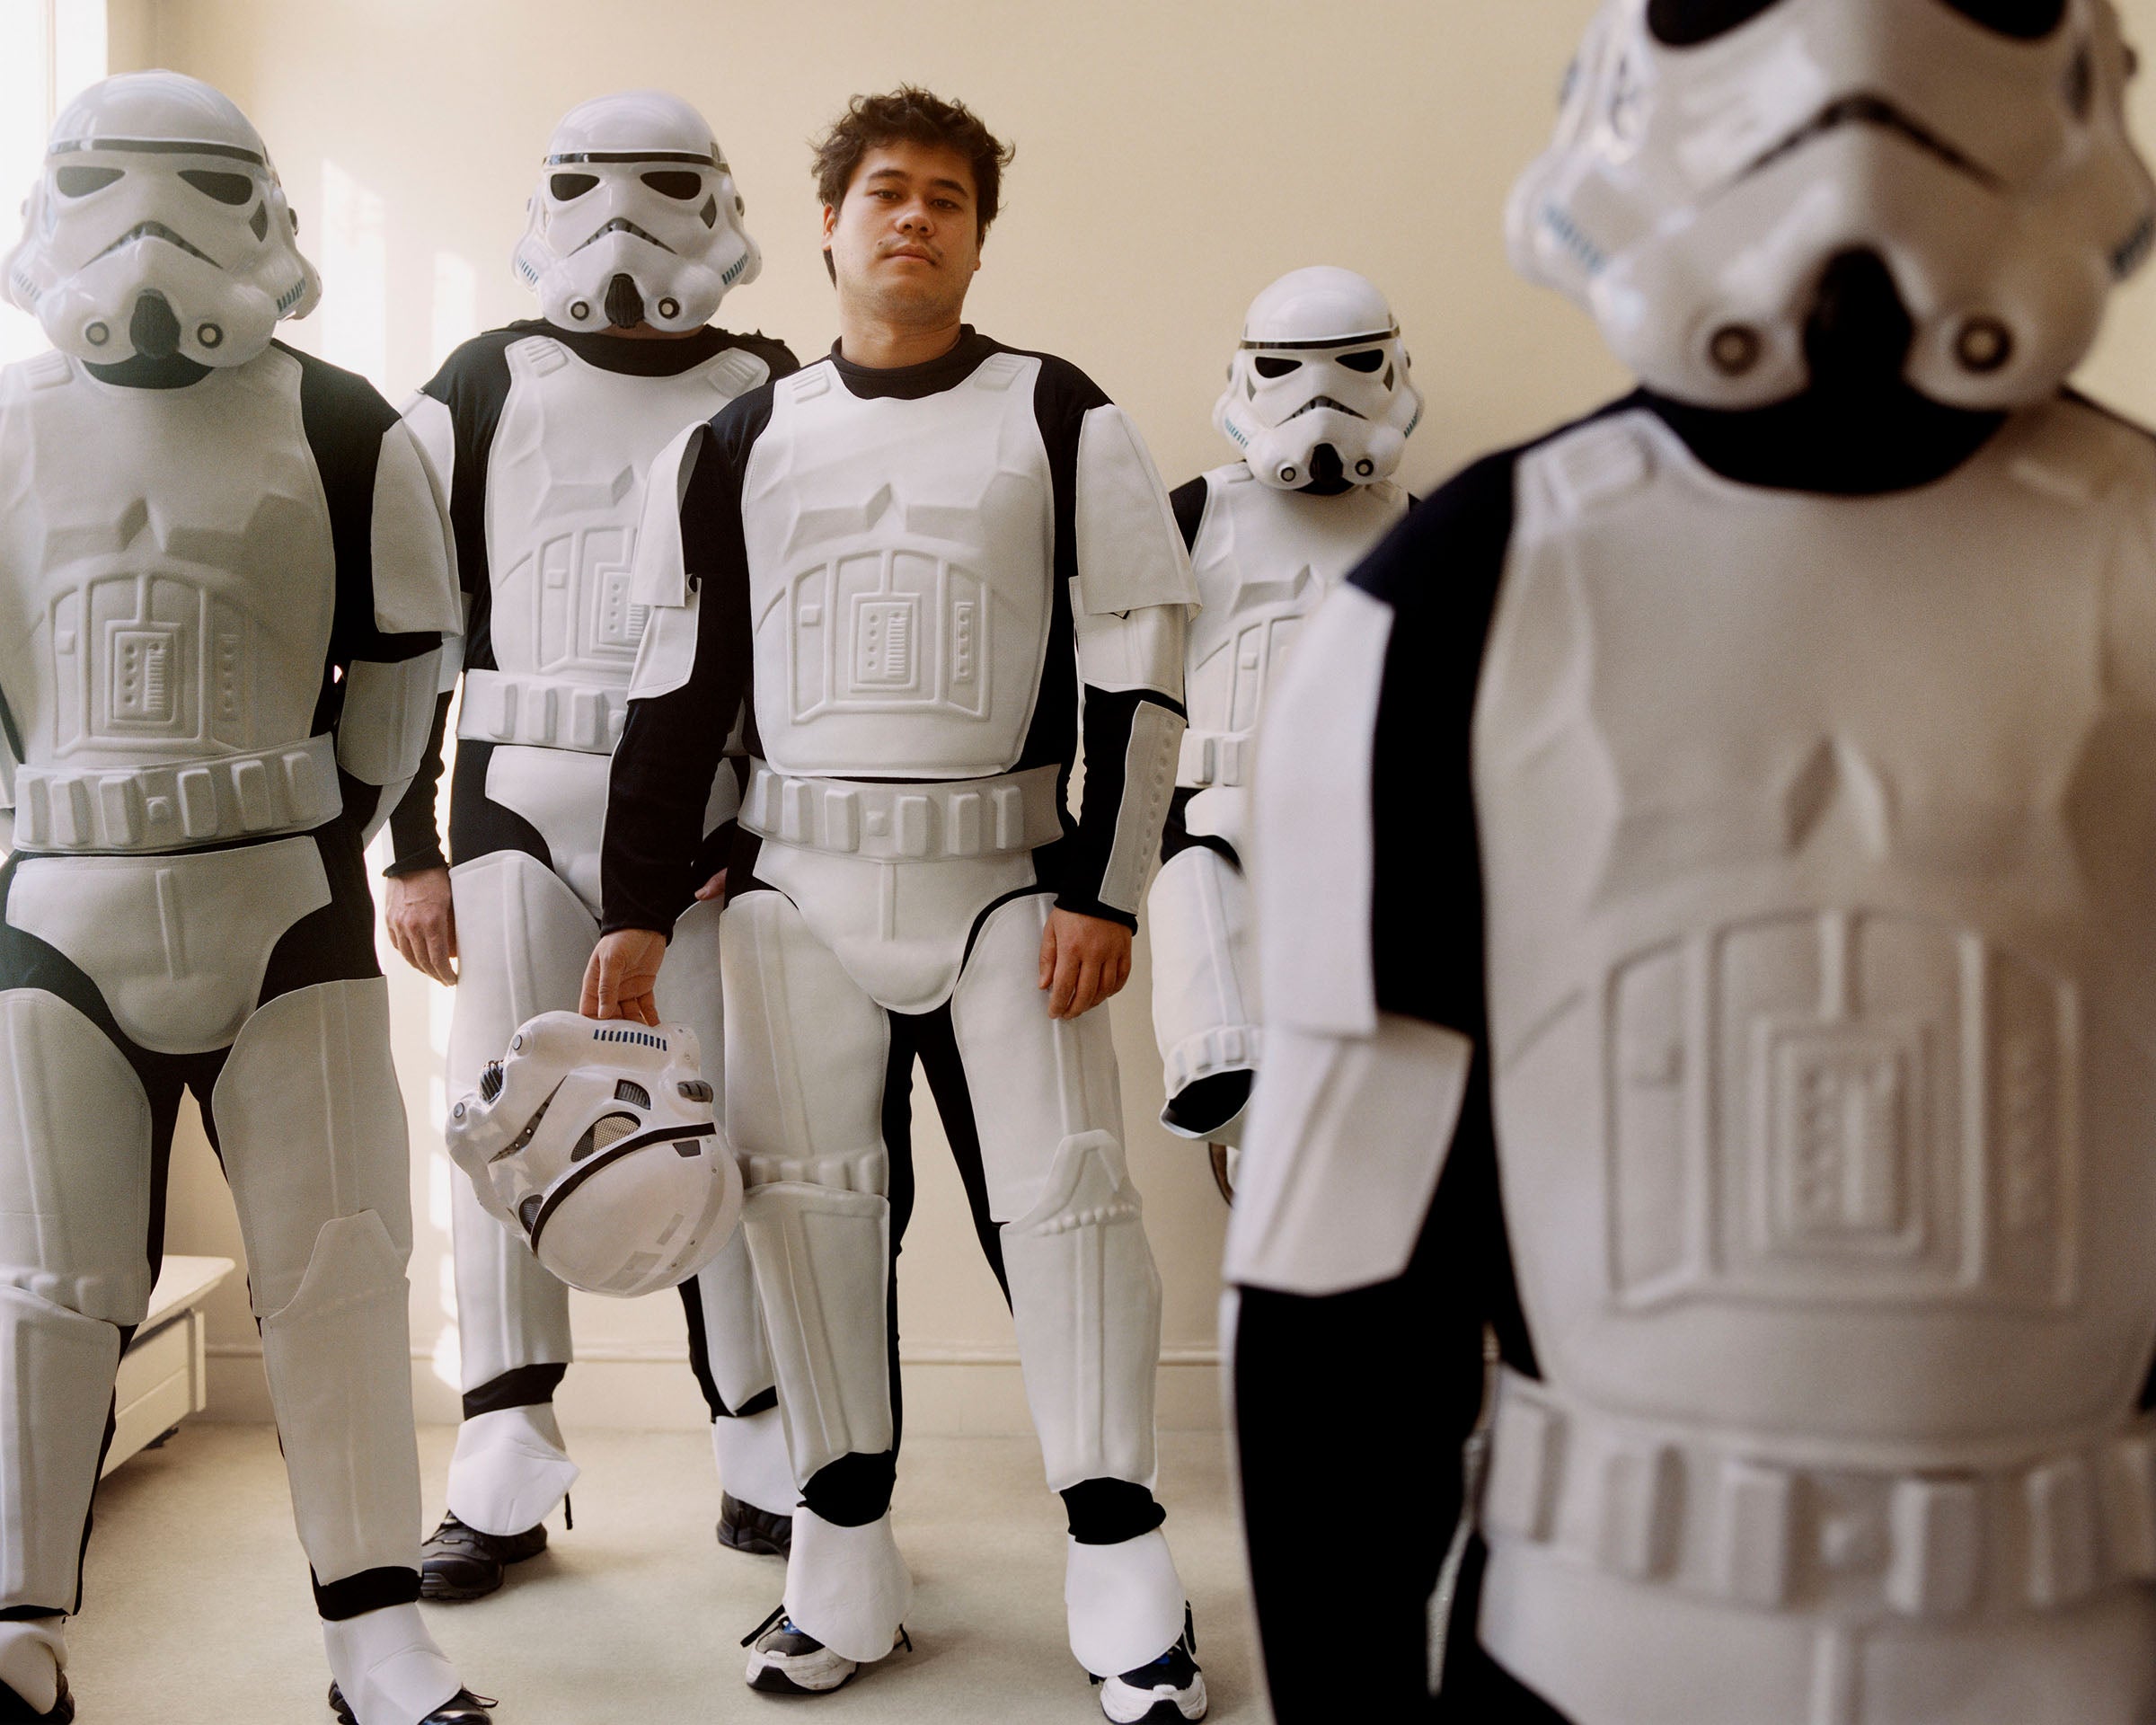 Thurstan Redding joins a group of cosplaying Storm Troopers from ‘Star Wars’